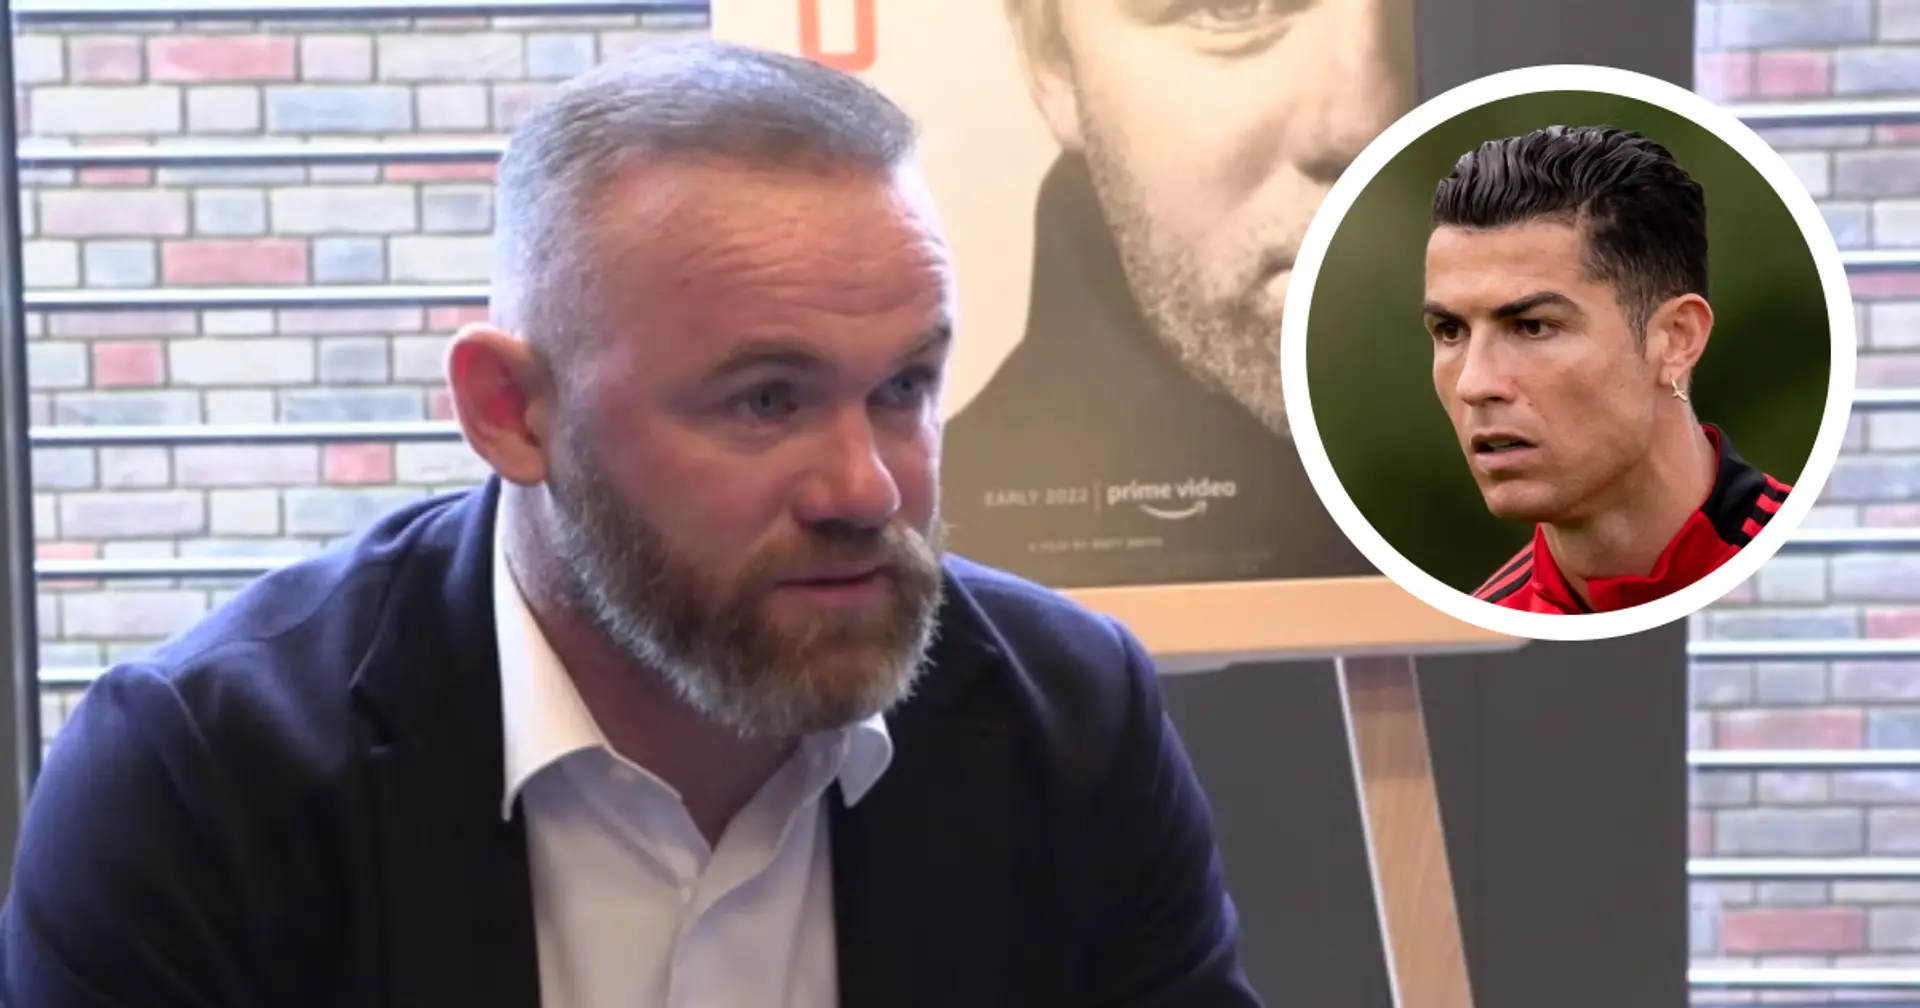 Wayne Rooney: 'Ronaldo is one of the best of all time. There'll be teams looking to sign him'